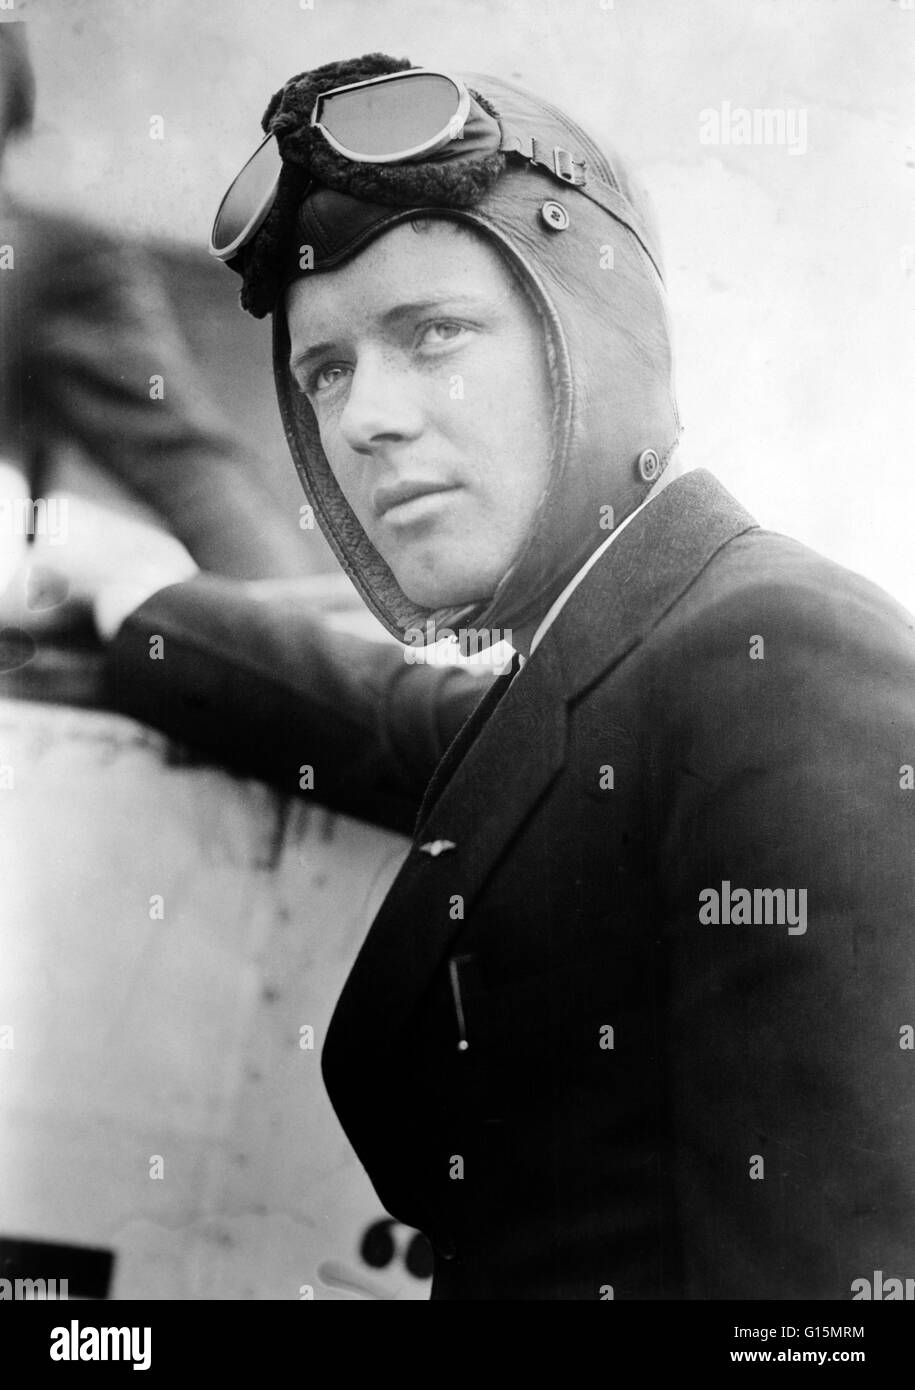 Charles Augustus Lindbergh (February 4, 1902 - August 26, 1974) was an American aviator. Lindbergh gained world fame as the result of his solo non-stop flight on May 20-21, 1927, made from Roosevelt Field, Garden City, Long Island to Le Bourget Field in P Stock Photo